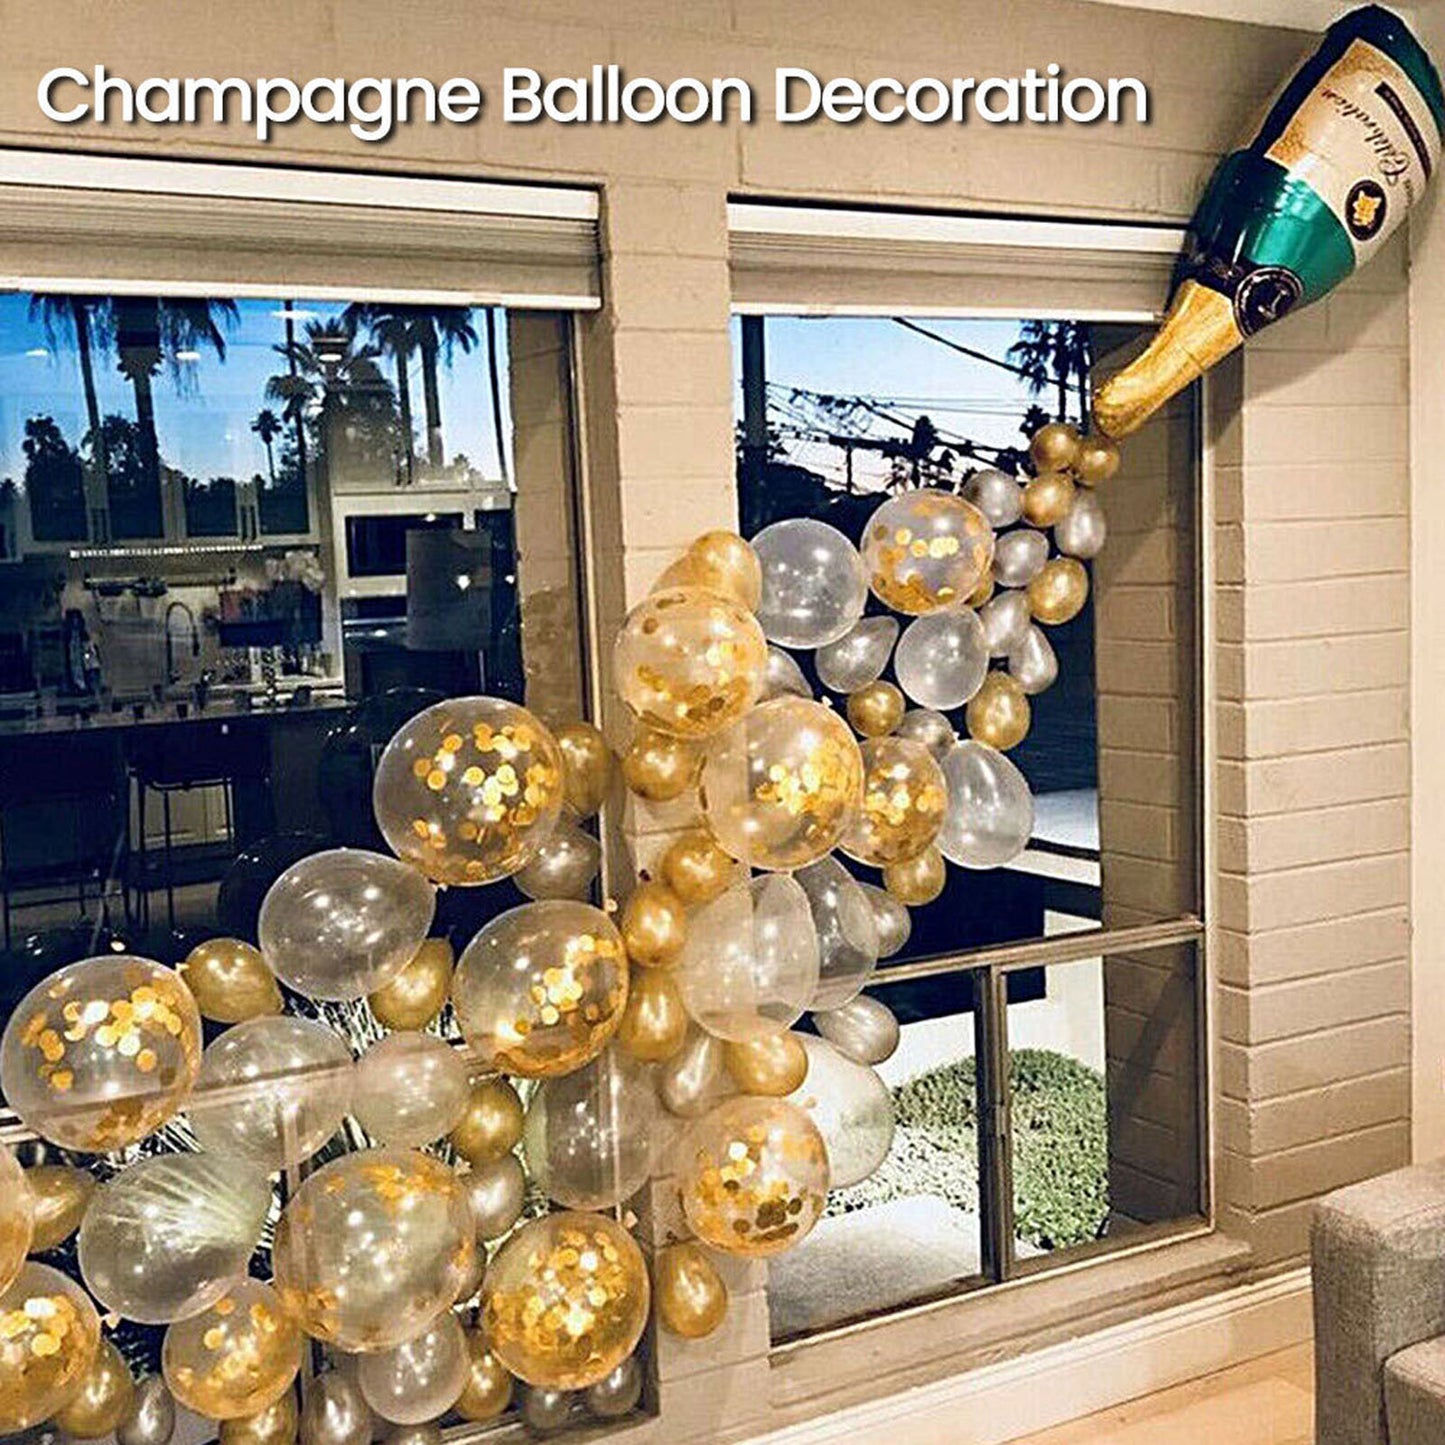 84 Pcs Champagne Balloon Arch Kit, 2 Champagne Bottle Balloons, 40 Latex Balloons, 40 Sequin Balloons and 2 Ribbons Ideal for Wedding Birthday Decorations